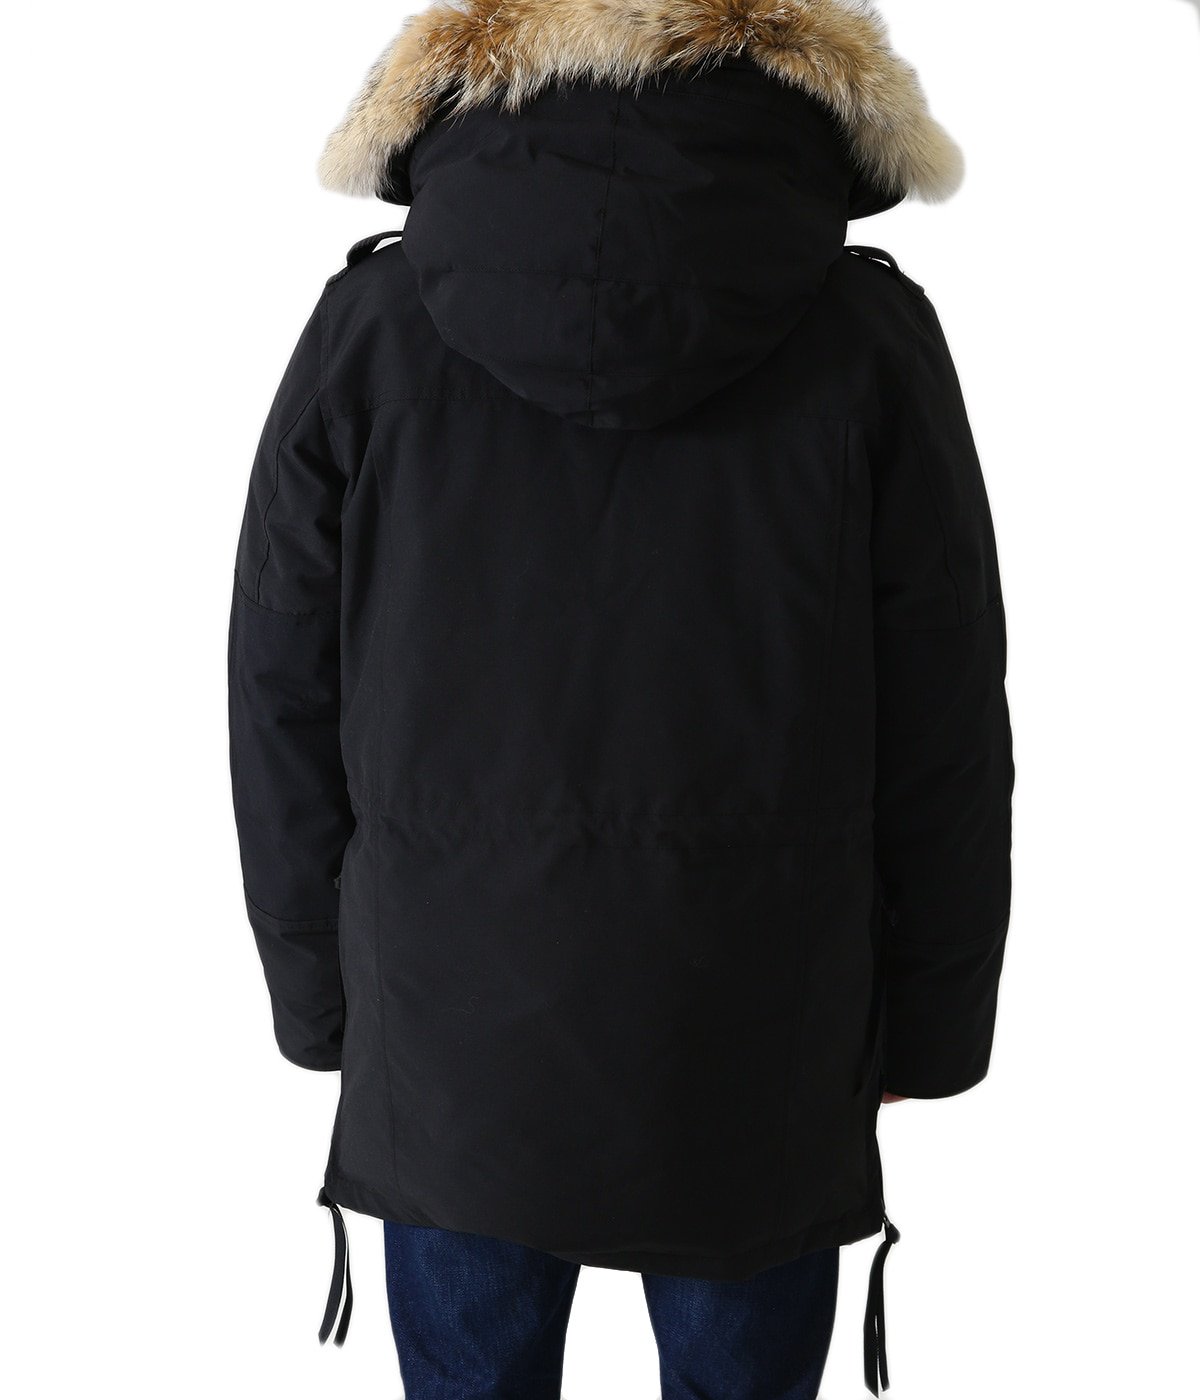 Macculloch Parka Fusion Fit | CANADA GOOSE(カナダグース